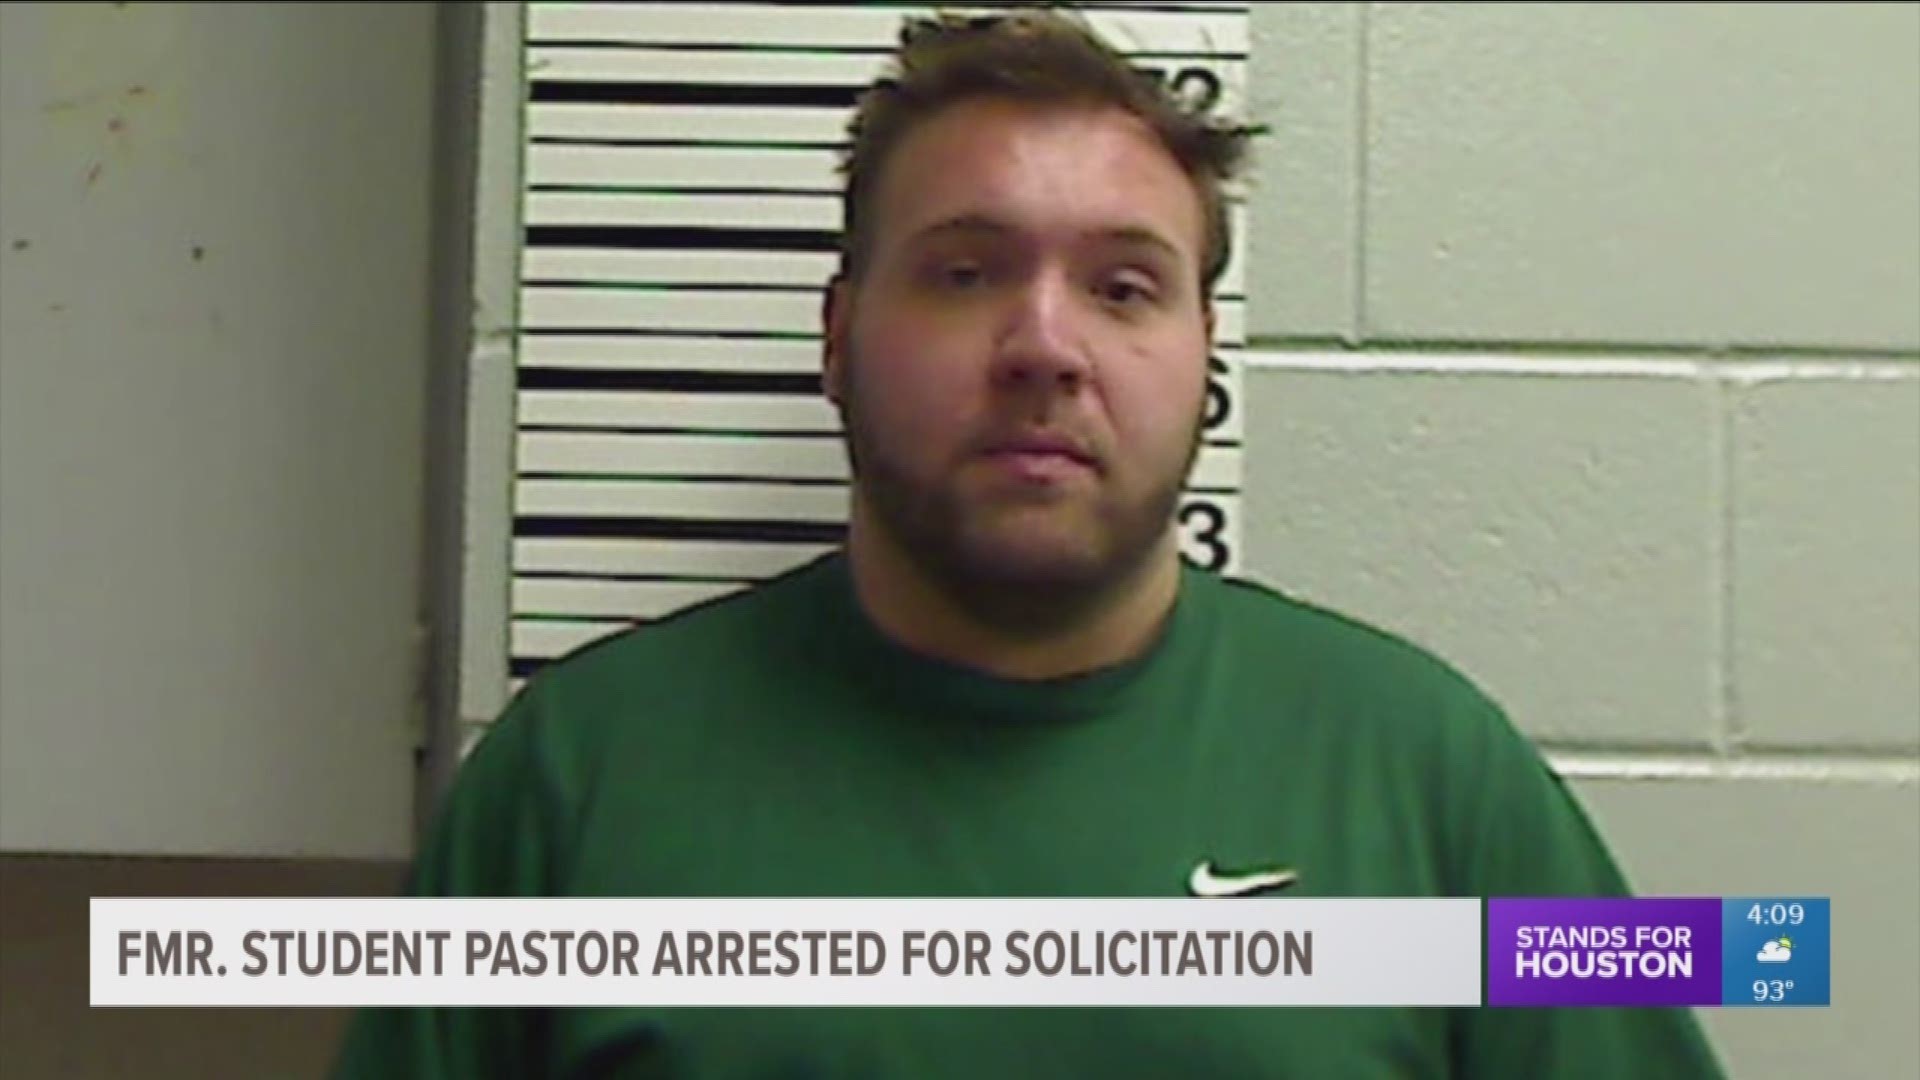 A former student pastor at Champion Forest Baptist Church has been arrested for trying to solicit a minor online. 